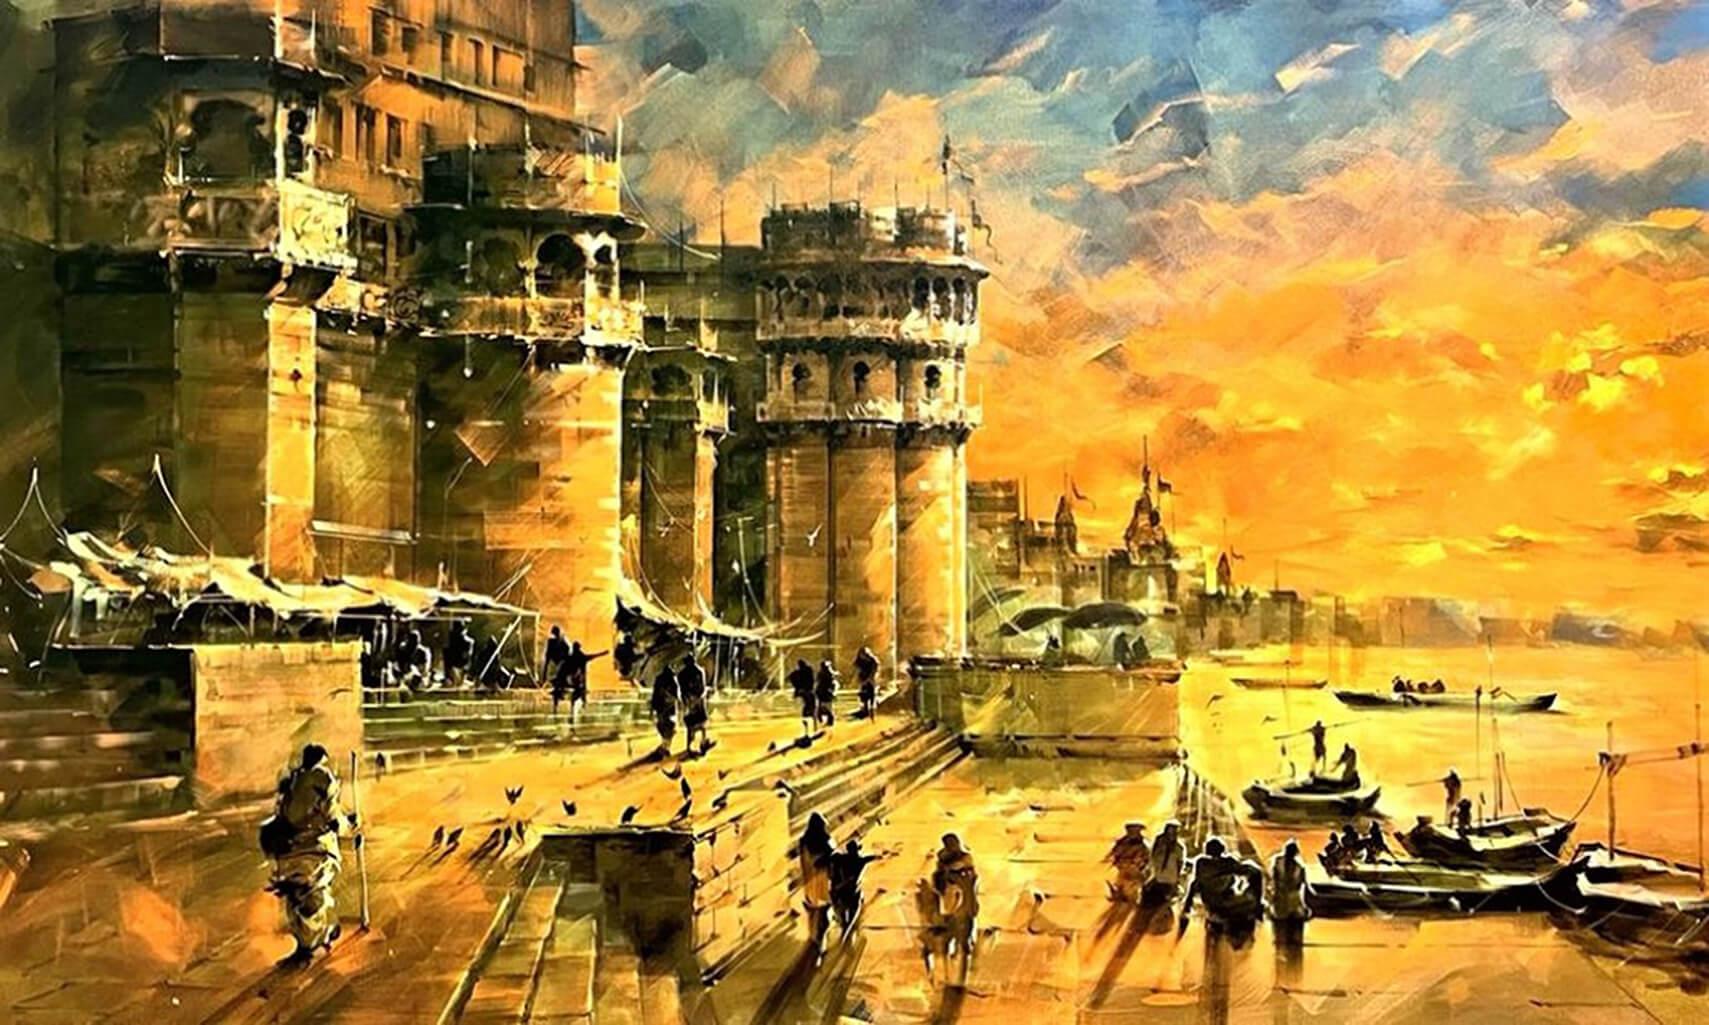 Sandeep Chhatraband Interior Painting - Cityscape, Acrylic on Canvas by Contemporary Indian Artist "In Stock"